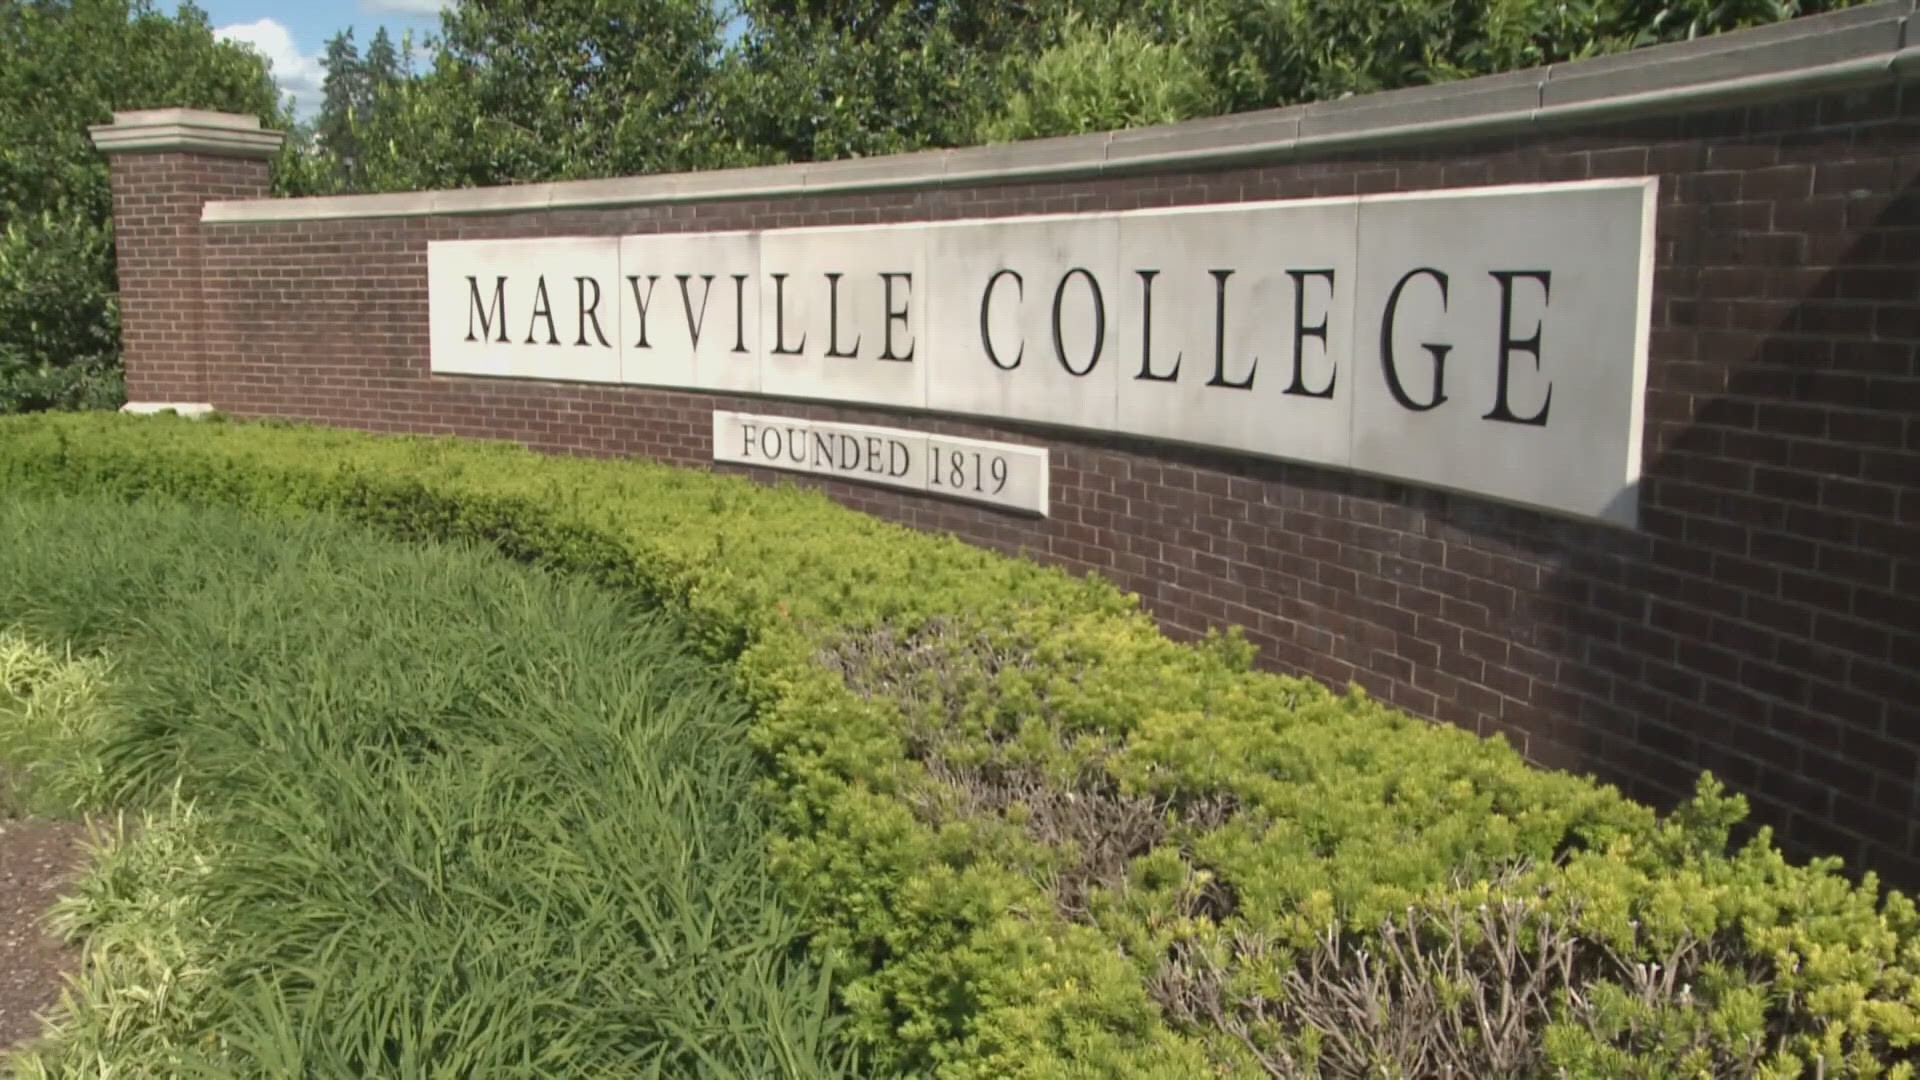 A law passed in 1901 forced Maryville College to segregate after more than 80 years of acceptance for everyone.